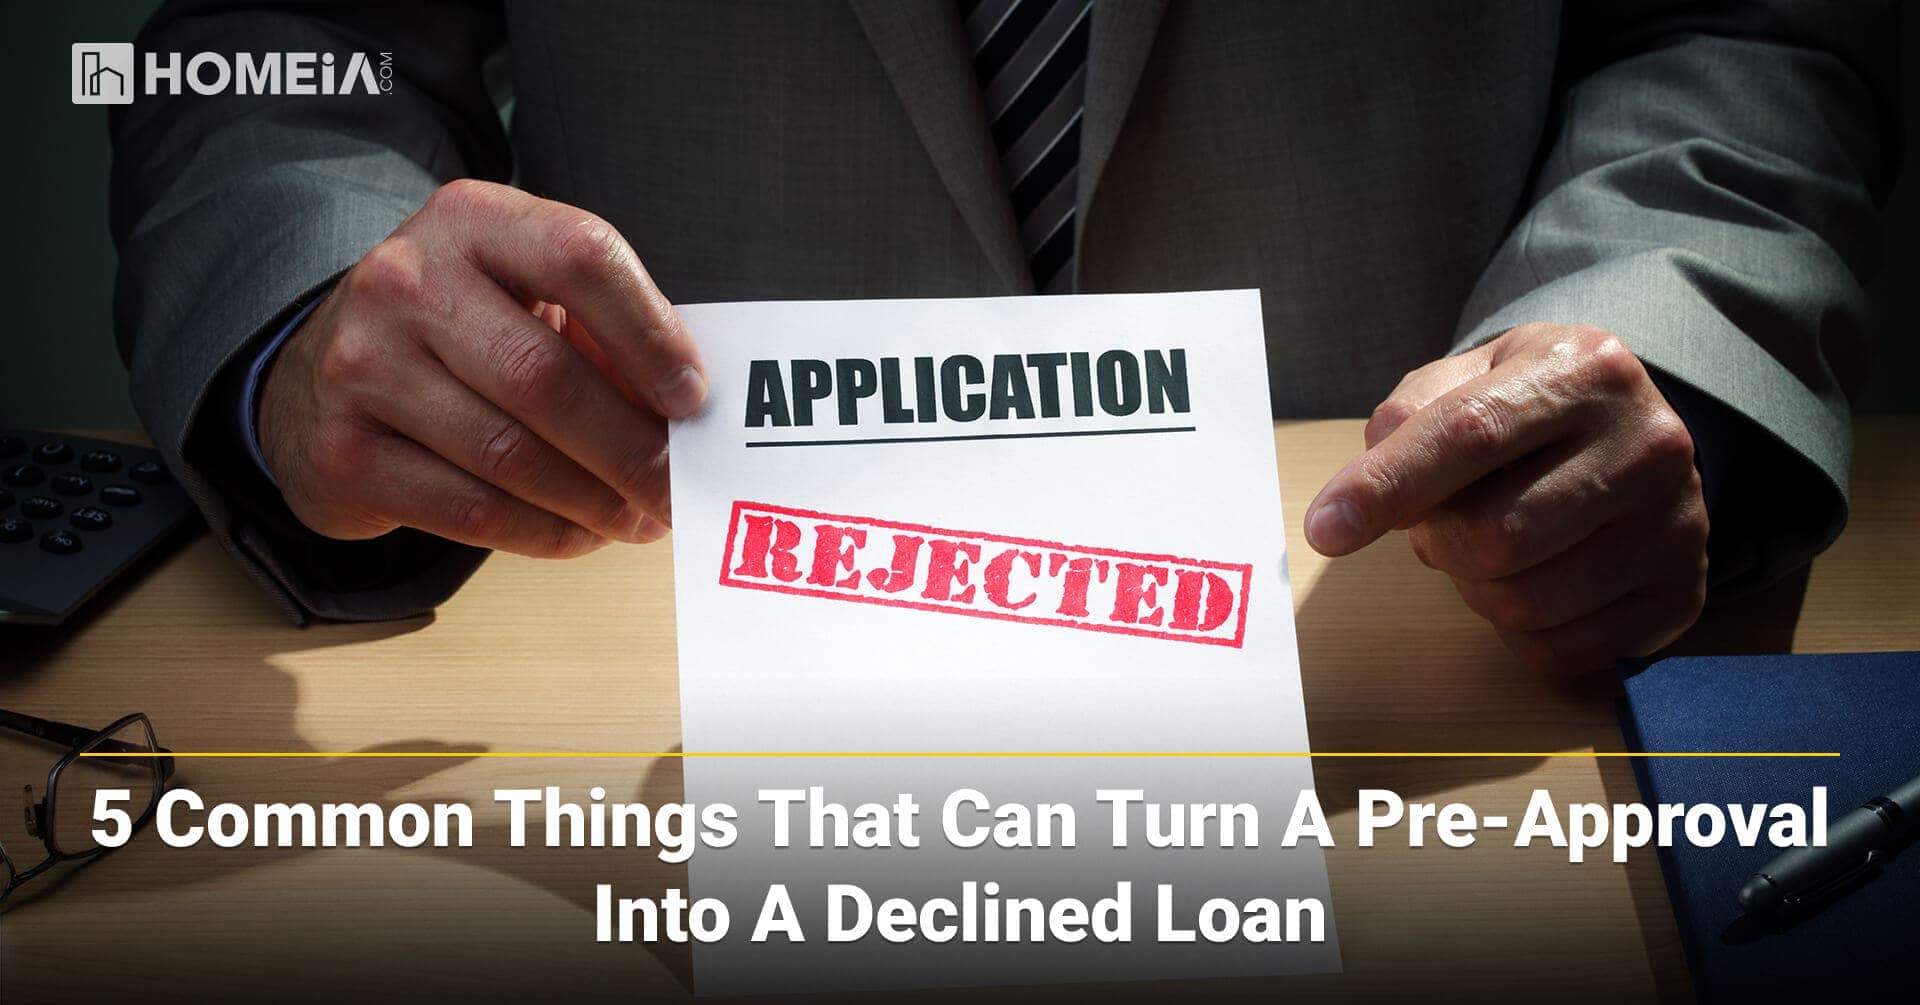 5 Common Things that Can Turn a Pre-Approval into a Declined Loan